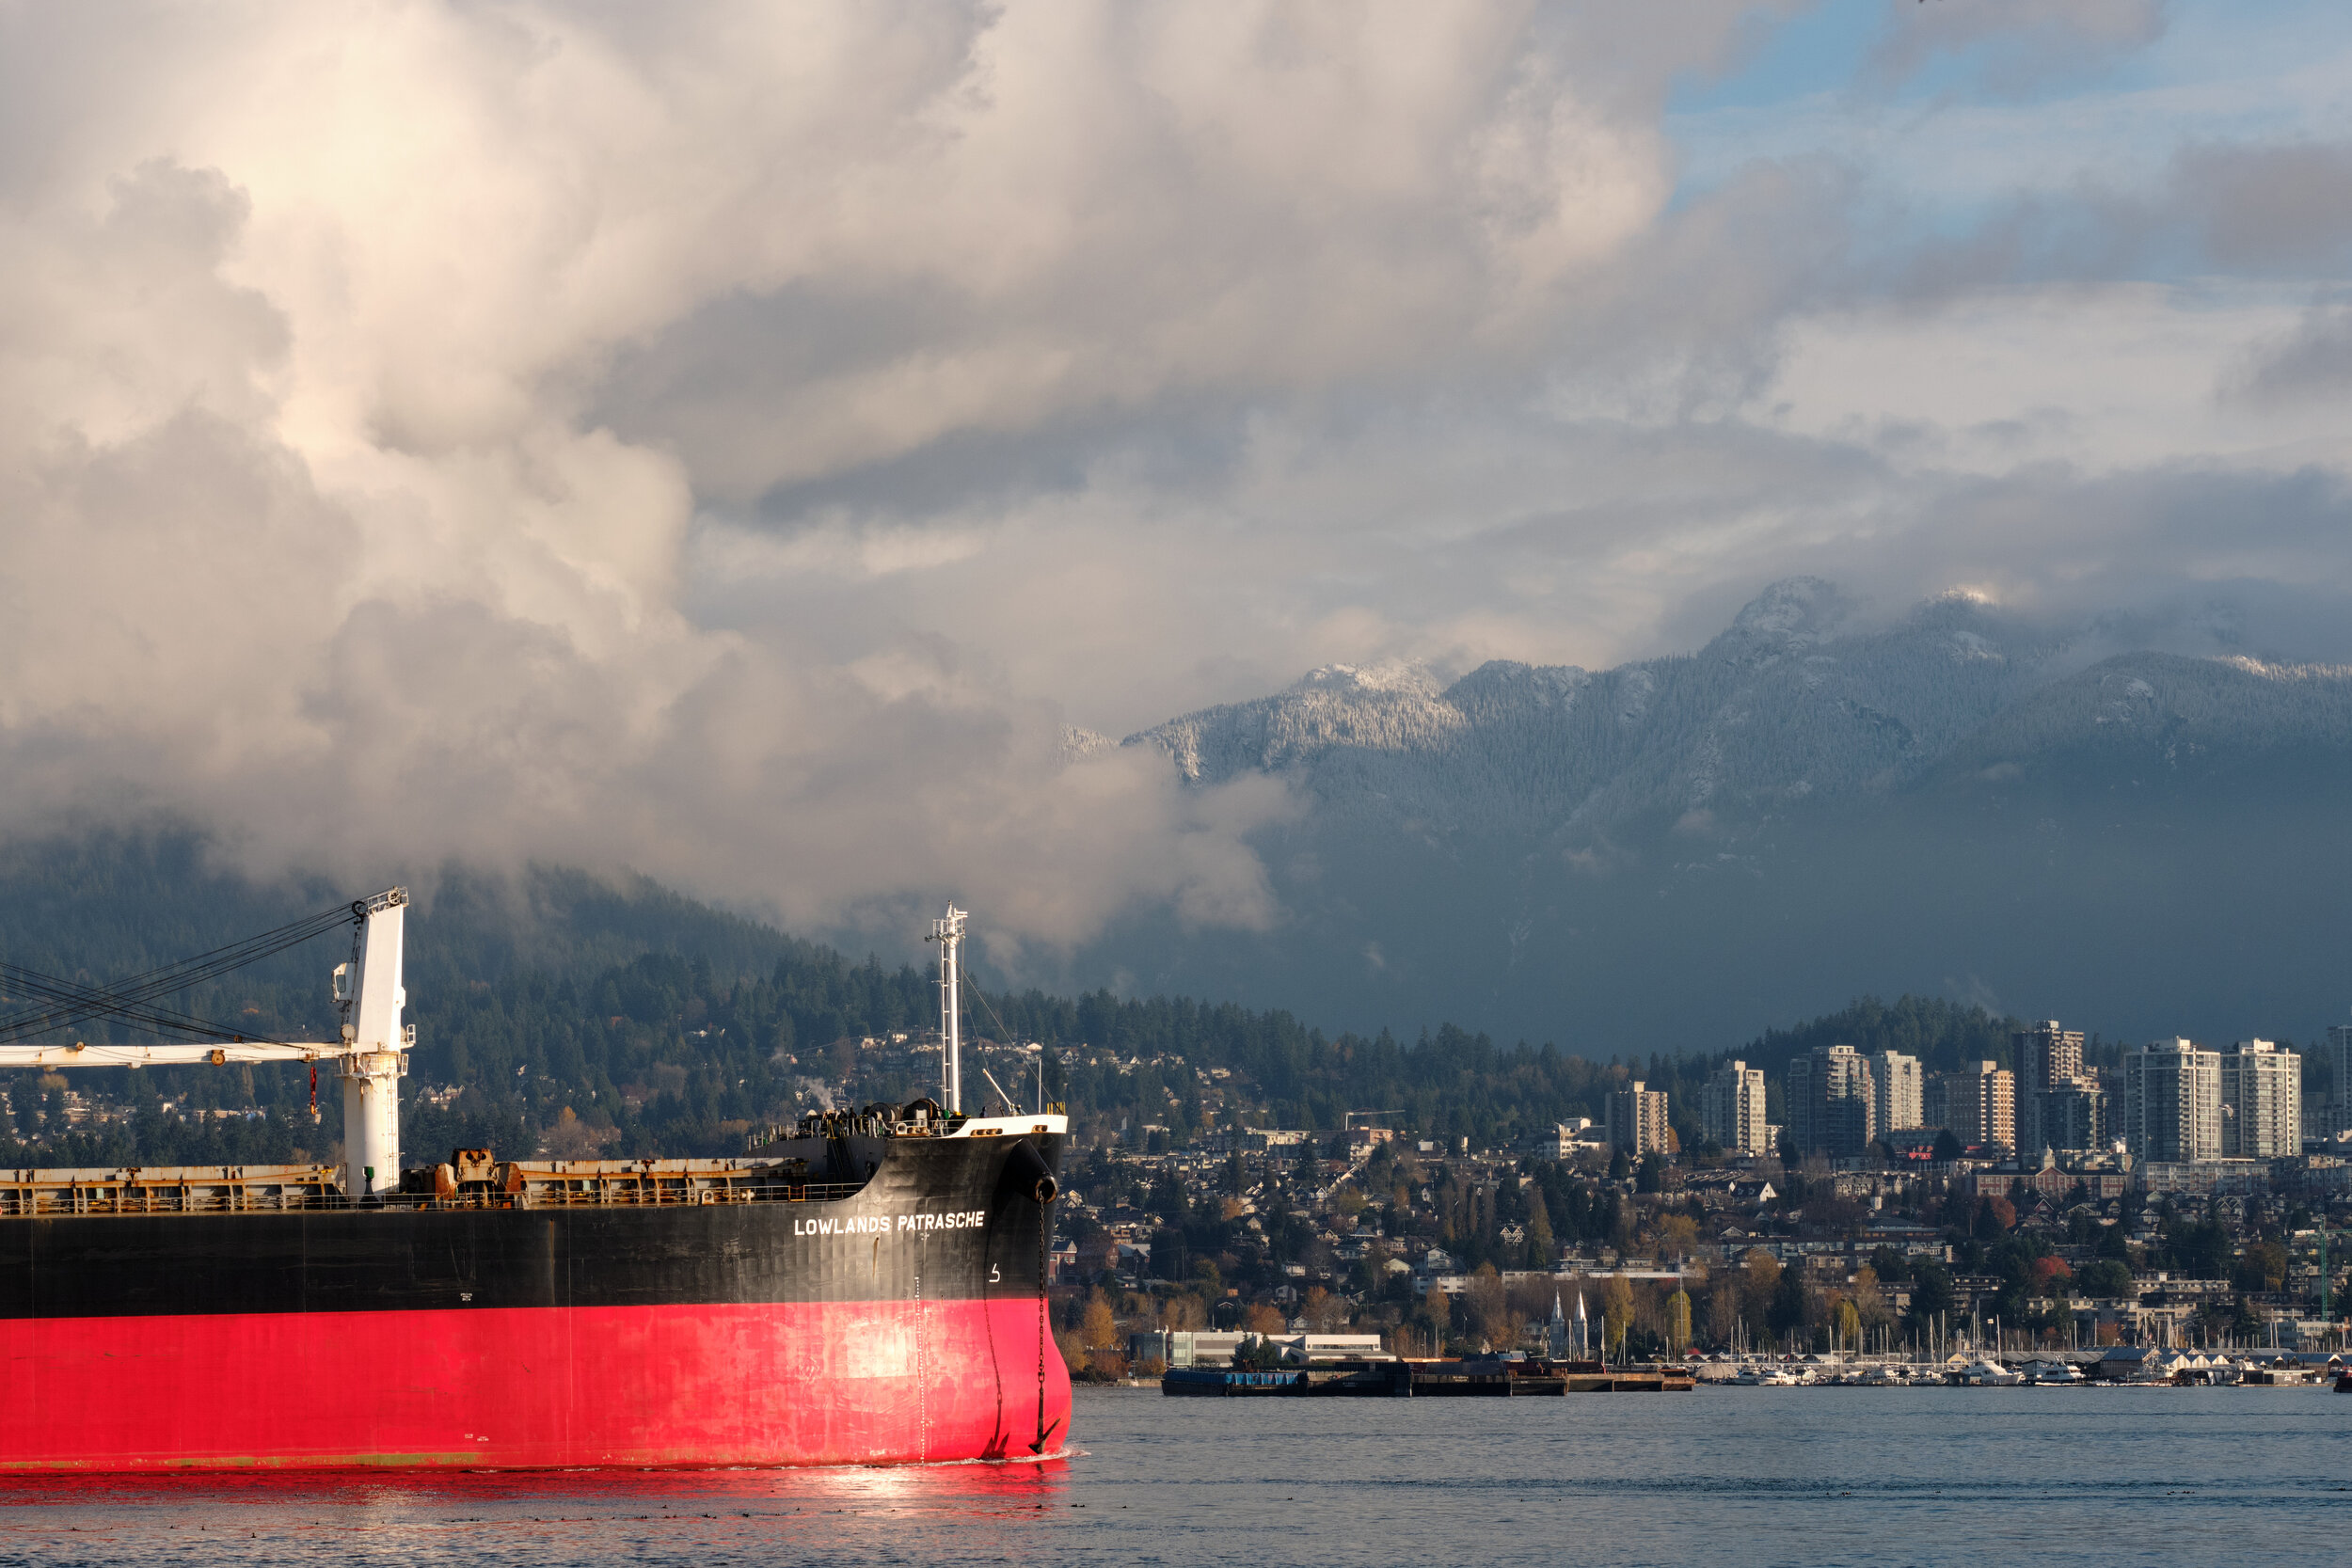 A freight ship enter the Burrard Inlet on November morning with North Vancouver seen in the background